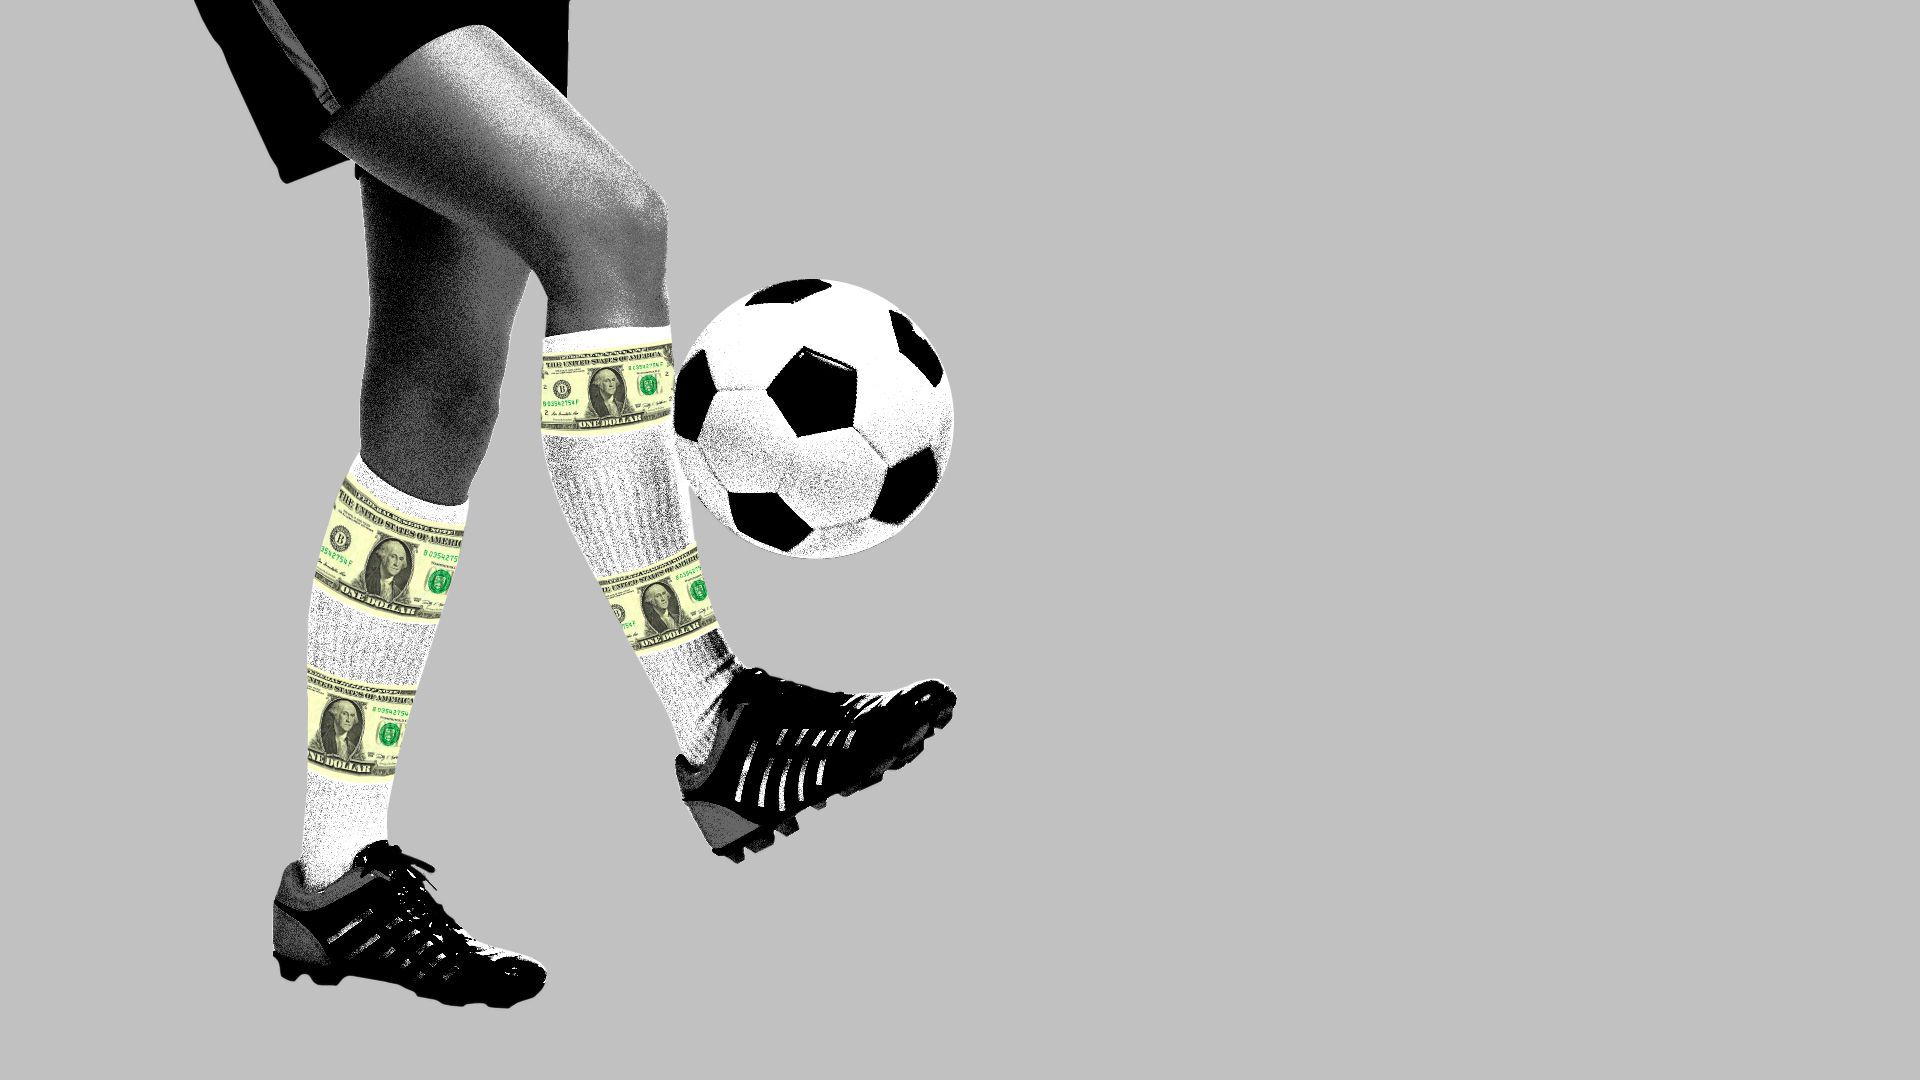 Illustration of soccer player with money striped socks